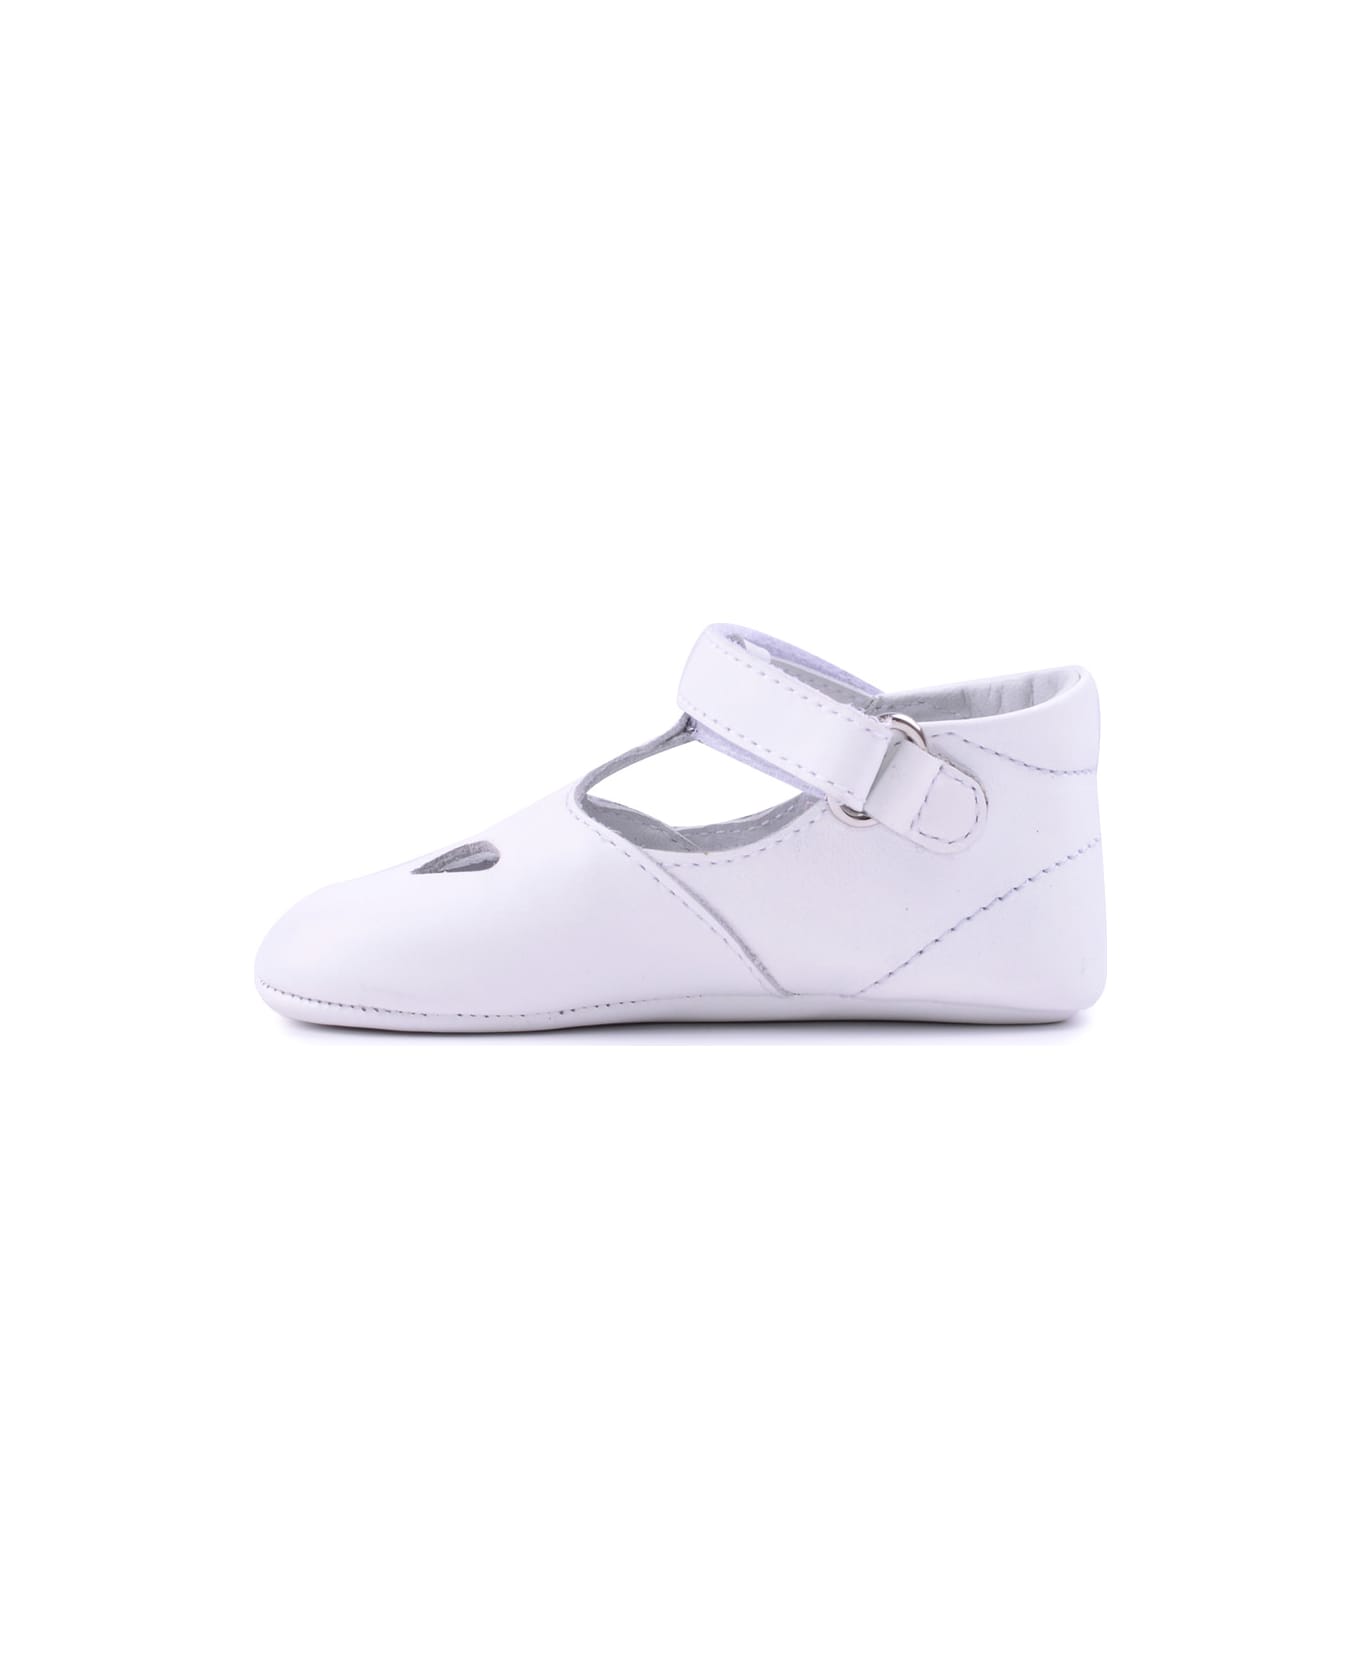 Gallucci Leather Shoes With Buckle - White